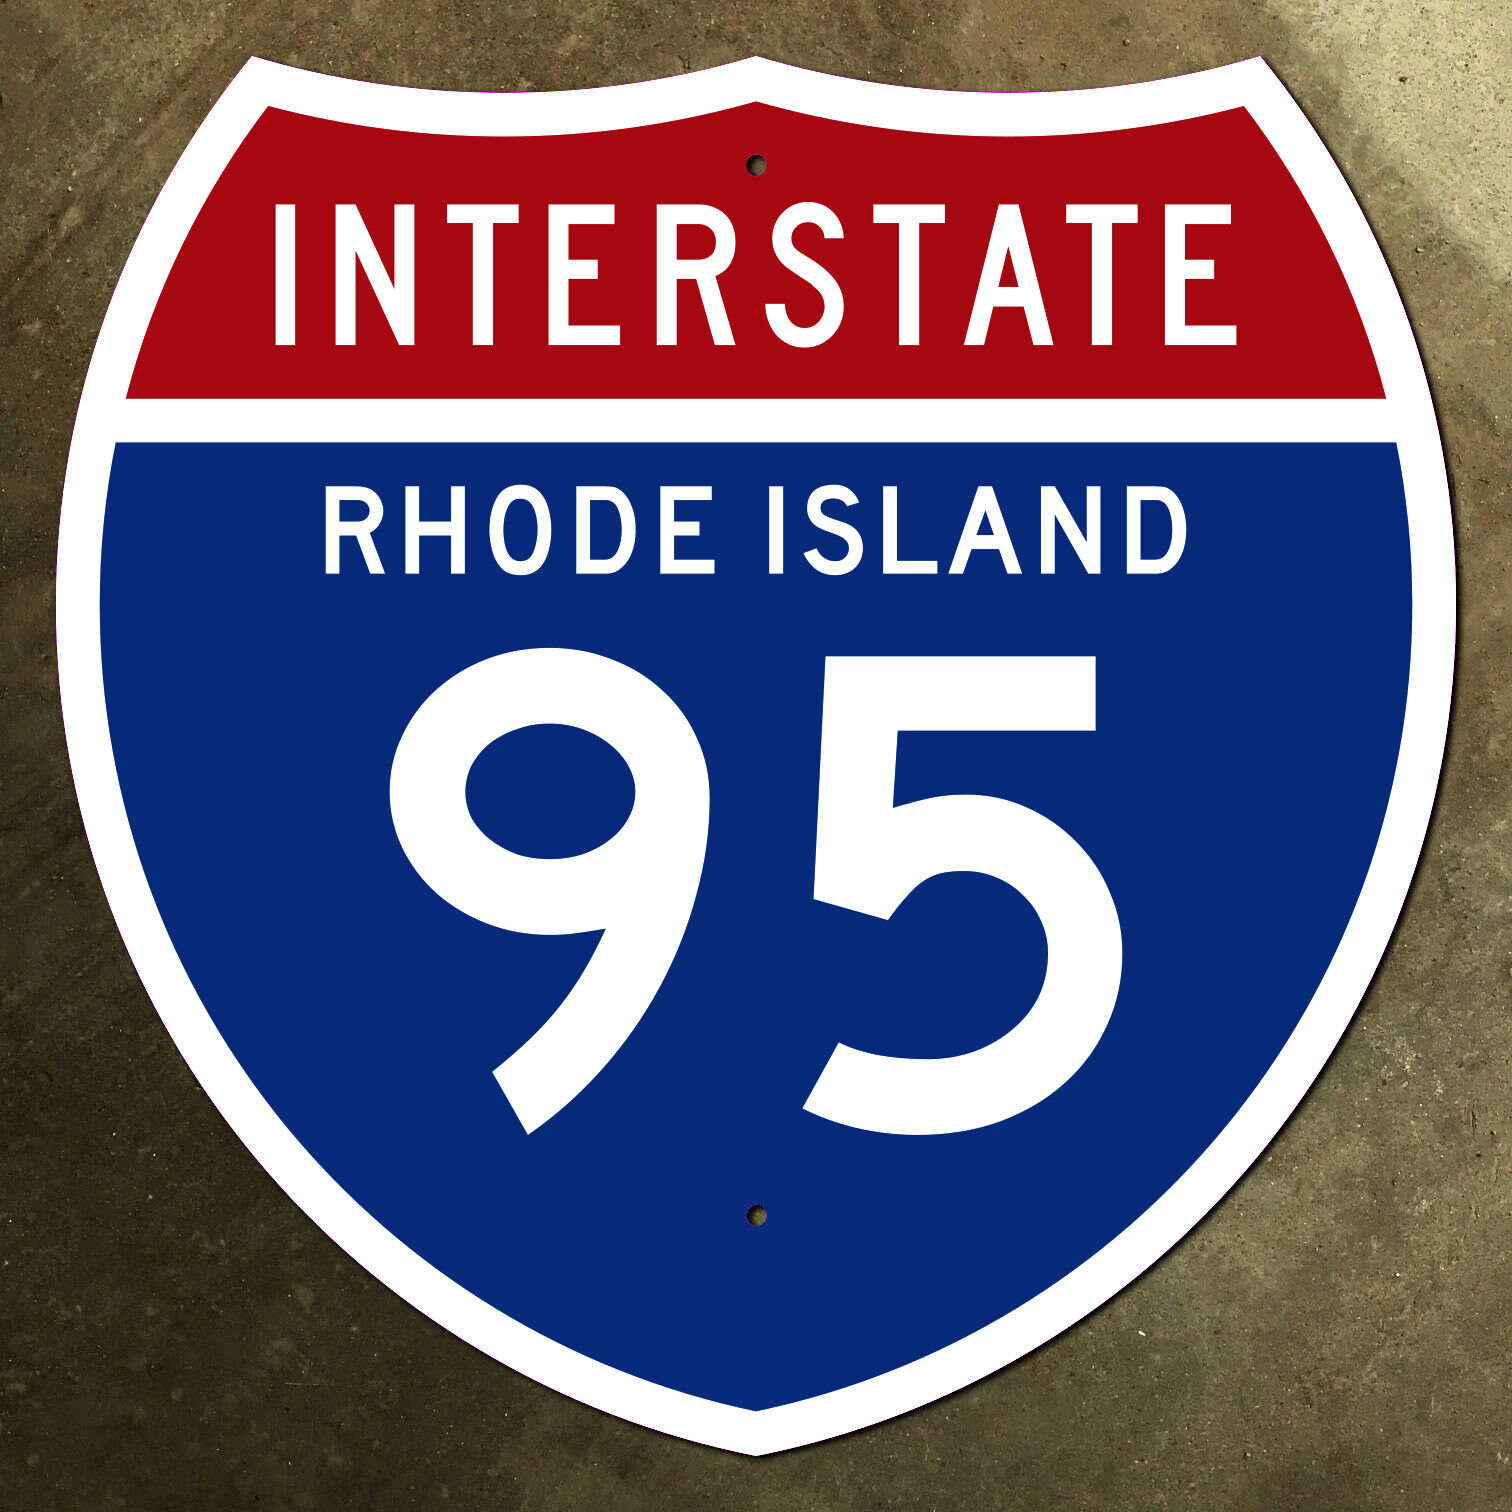 Rhode Island interstate route 95 highway marker road sign 1957 Providence 12x12